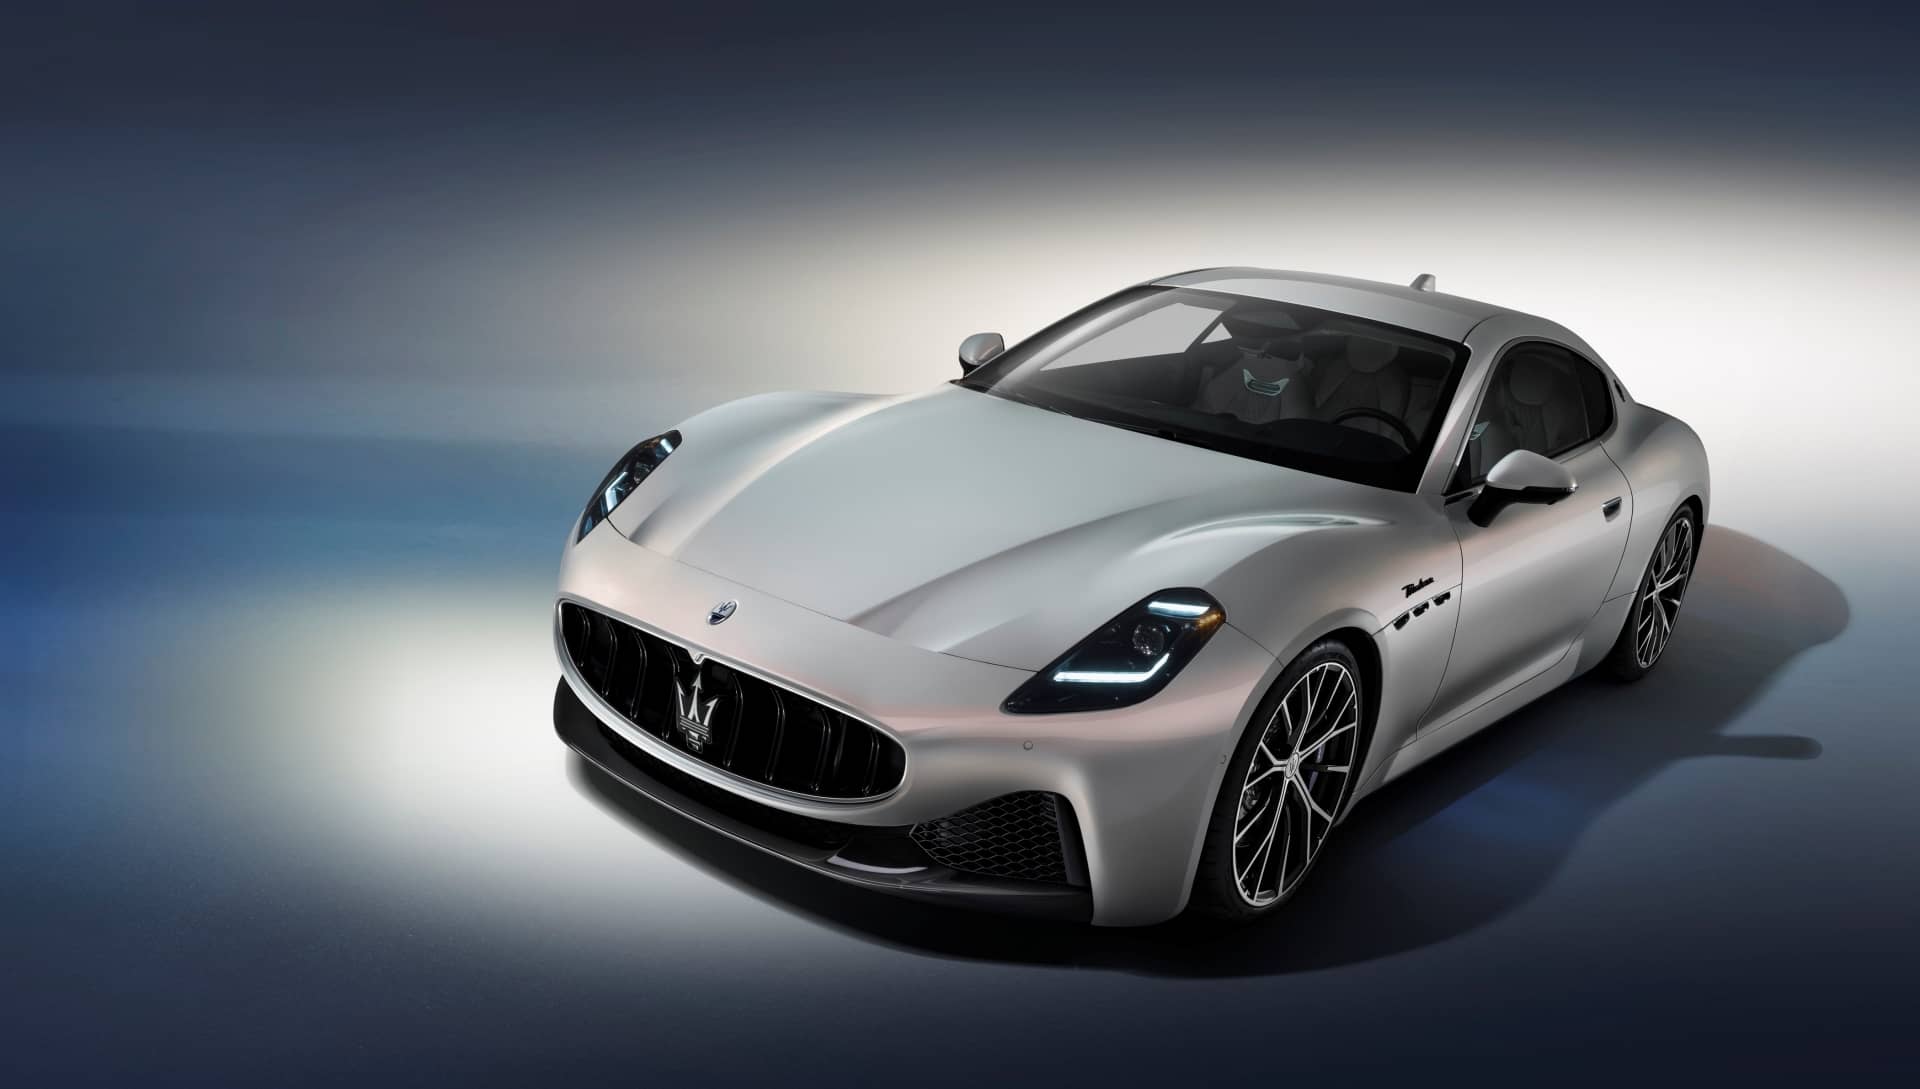 Maserati puts a price on the new GranTurismo and points directly to the 911 Turbo